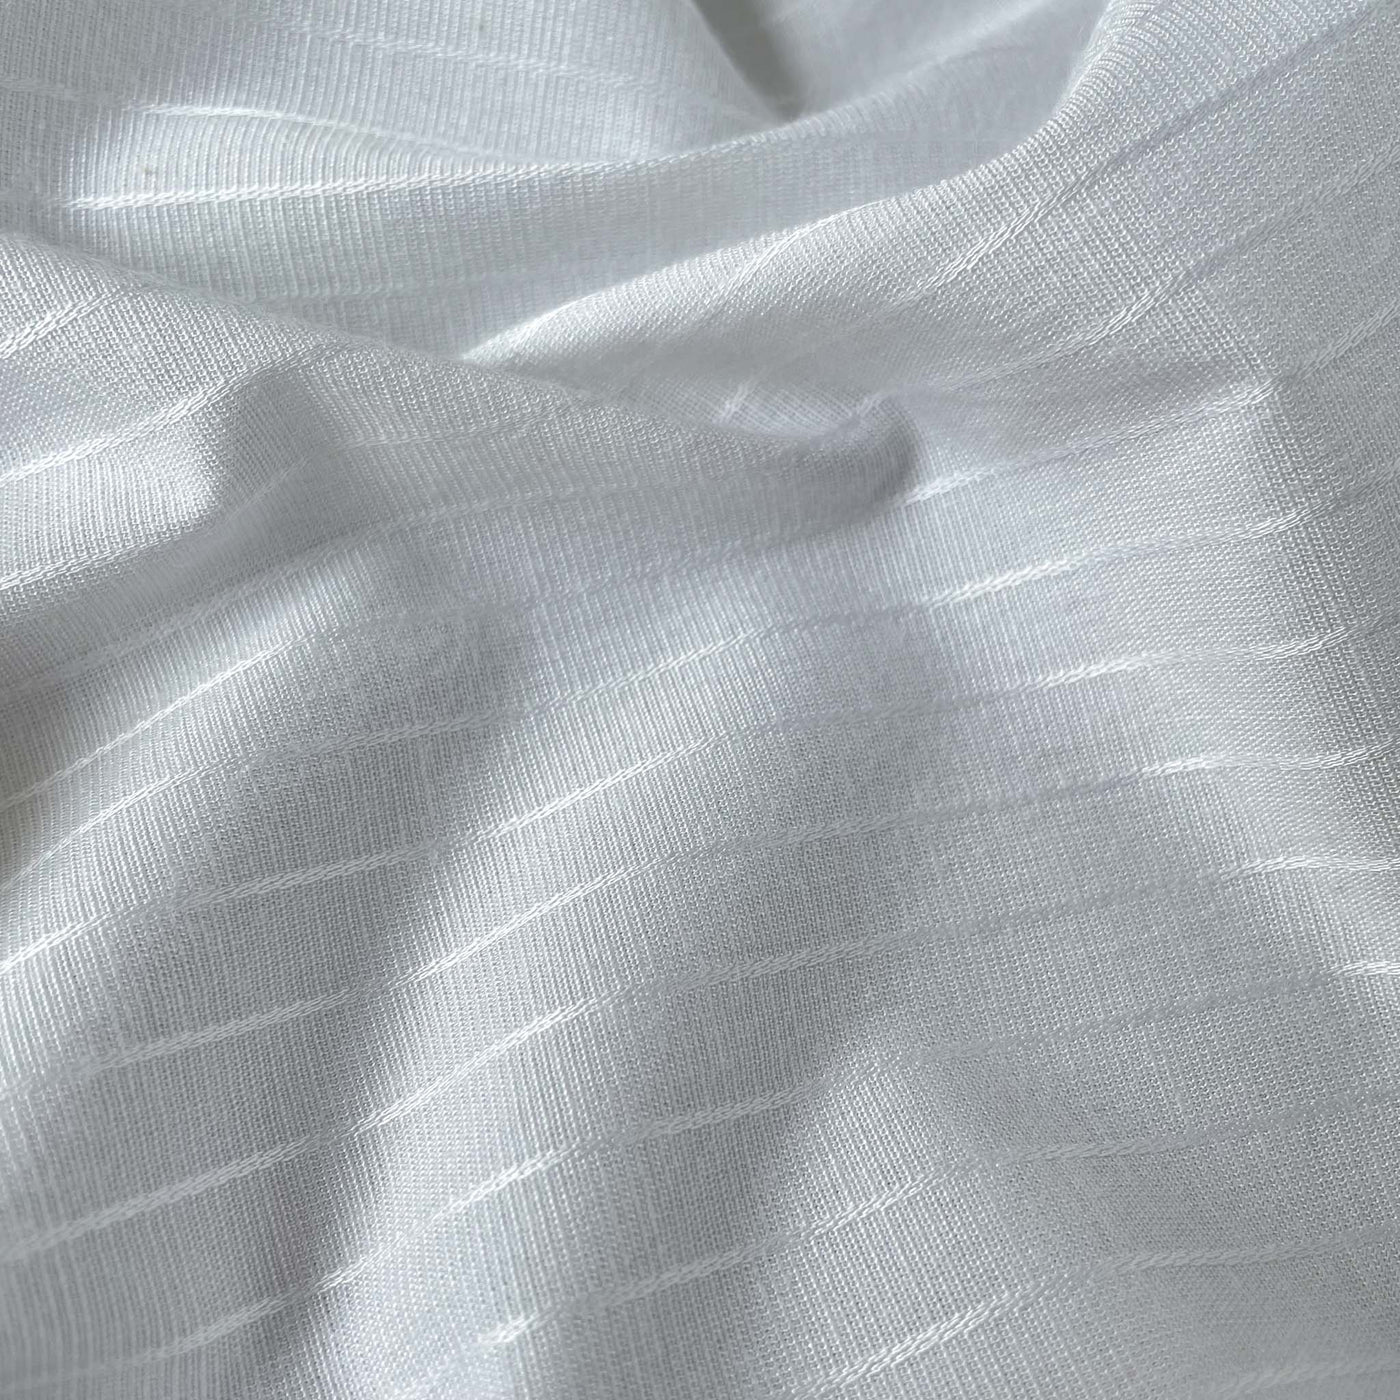 Dyeable Fabric Cut Piece (CUT PIECE) White Dyeable Pure Cotton Lycra Stripes Fabric (Width 48 Inches)